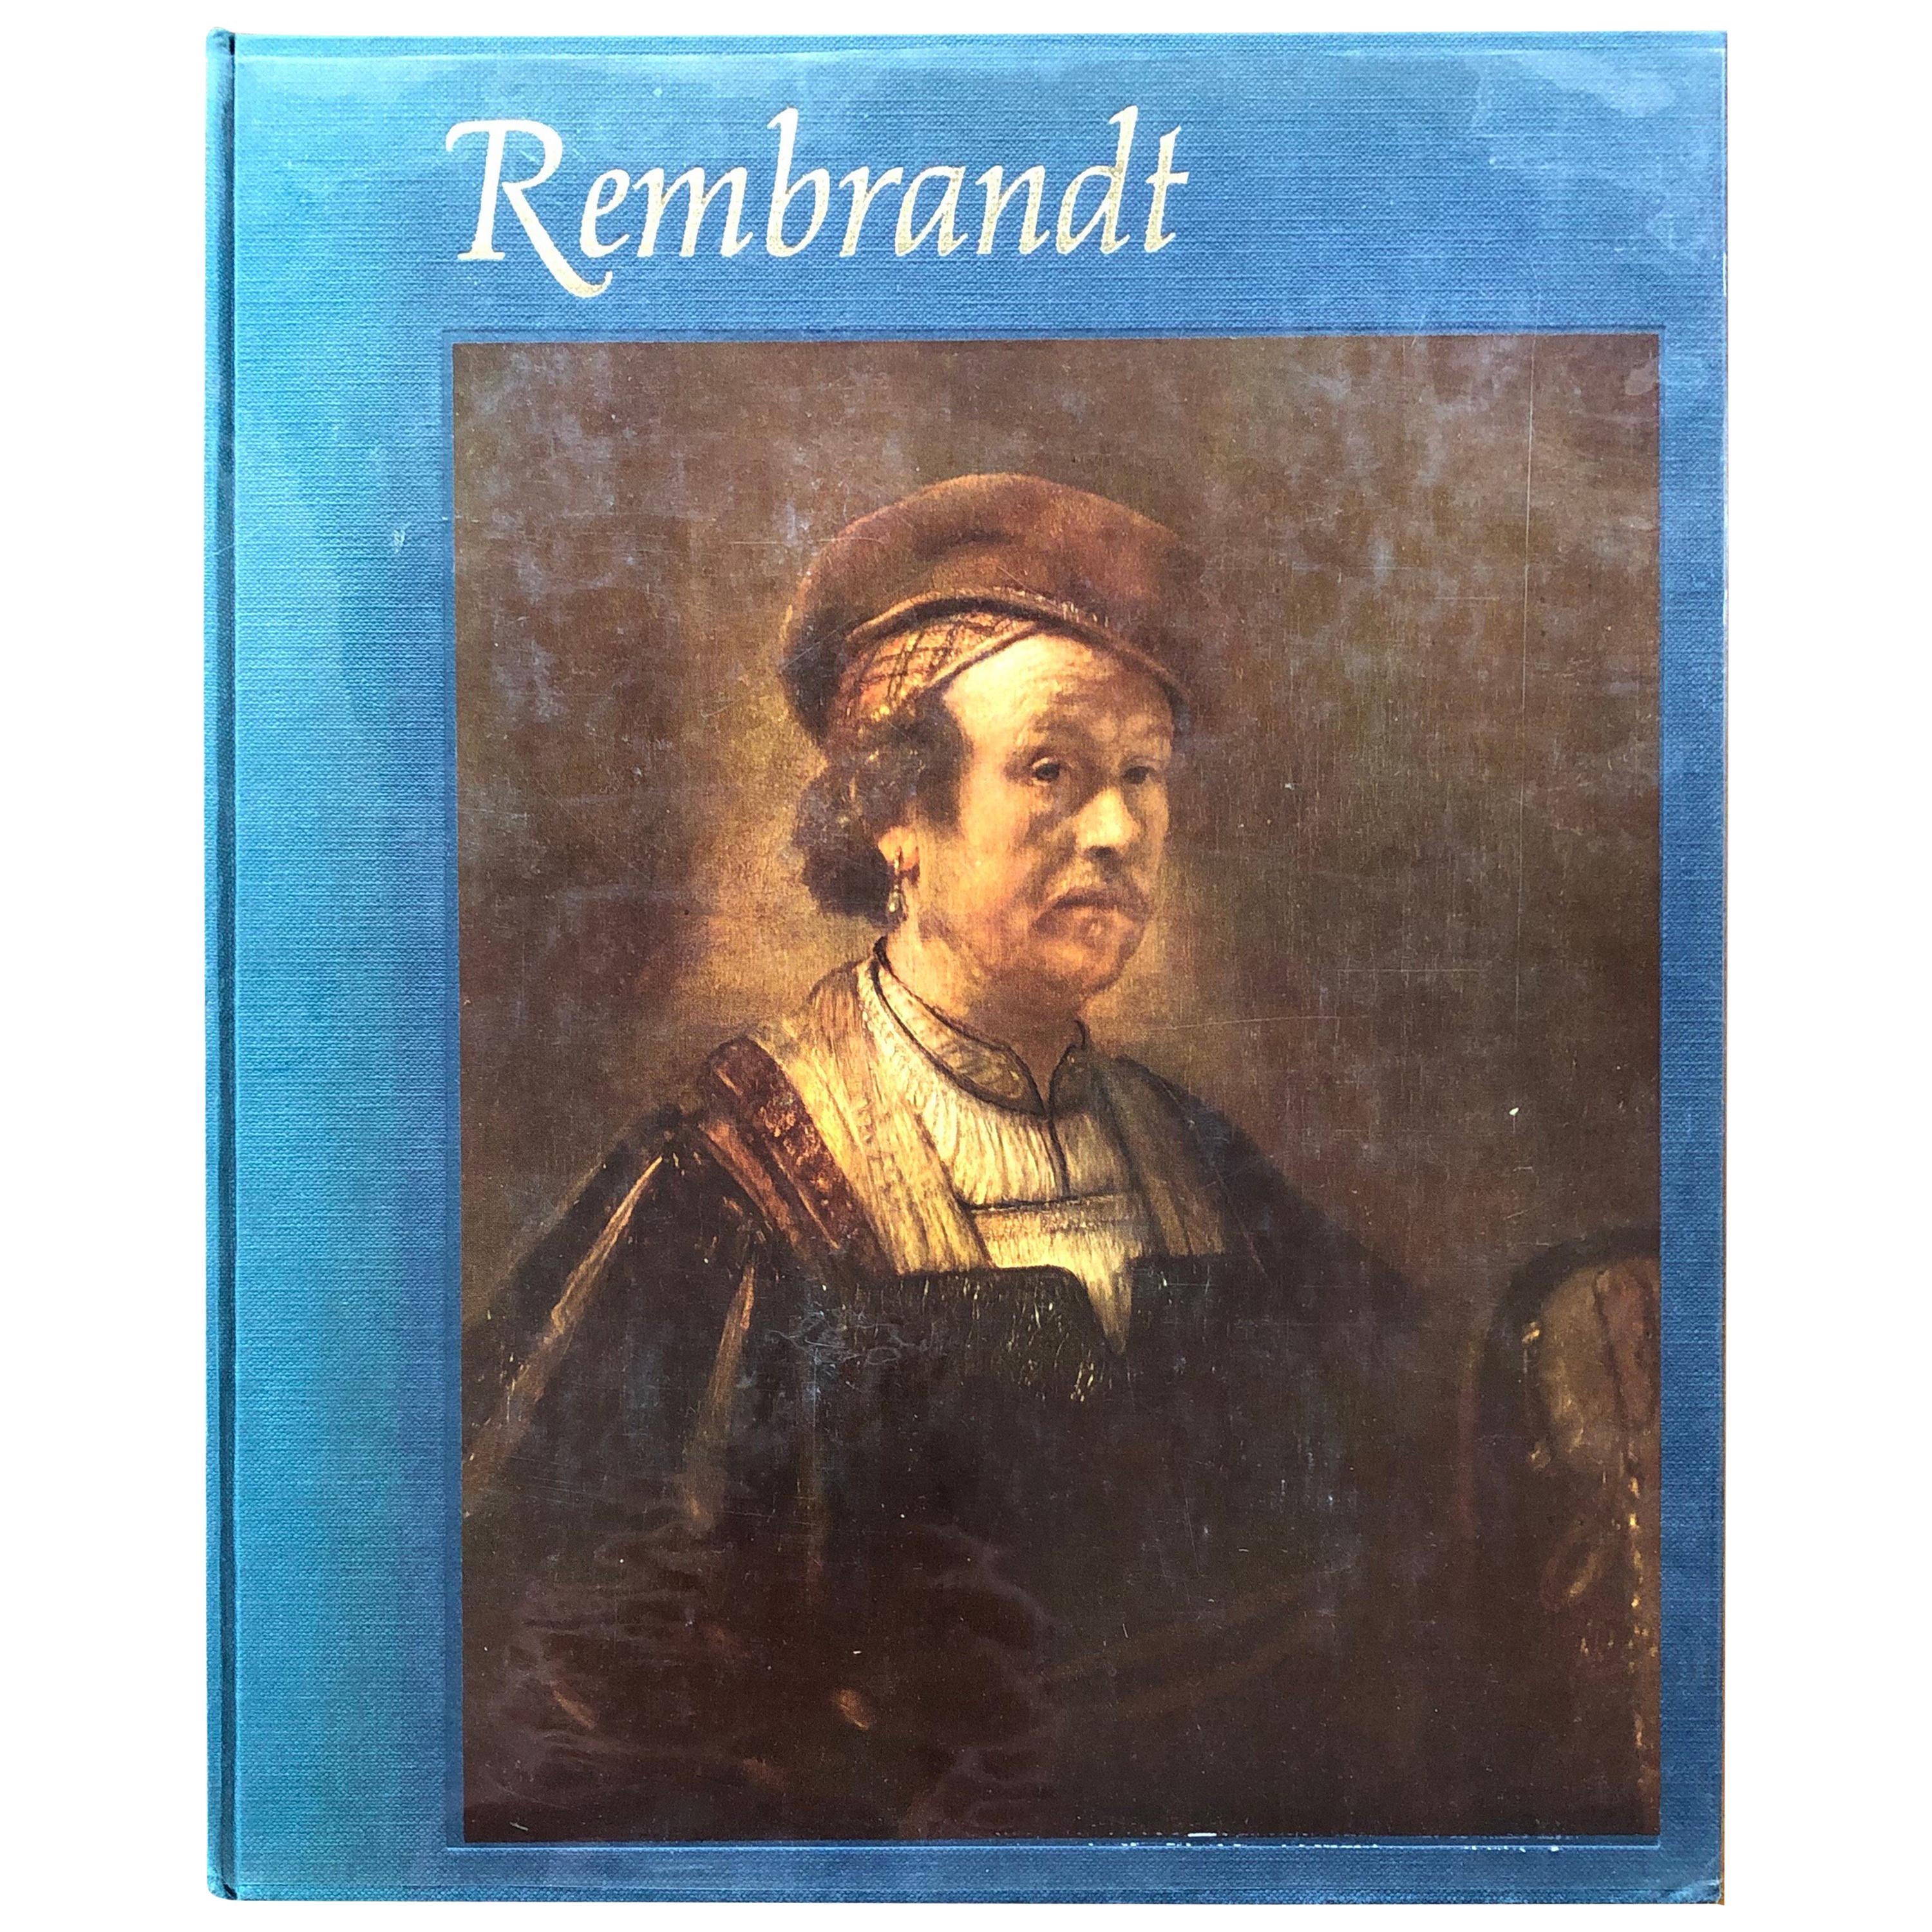 Great Art Of The Ages "Rembrandt" by Wilhelm Koehler, Illustrated, U.S.A, 1961